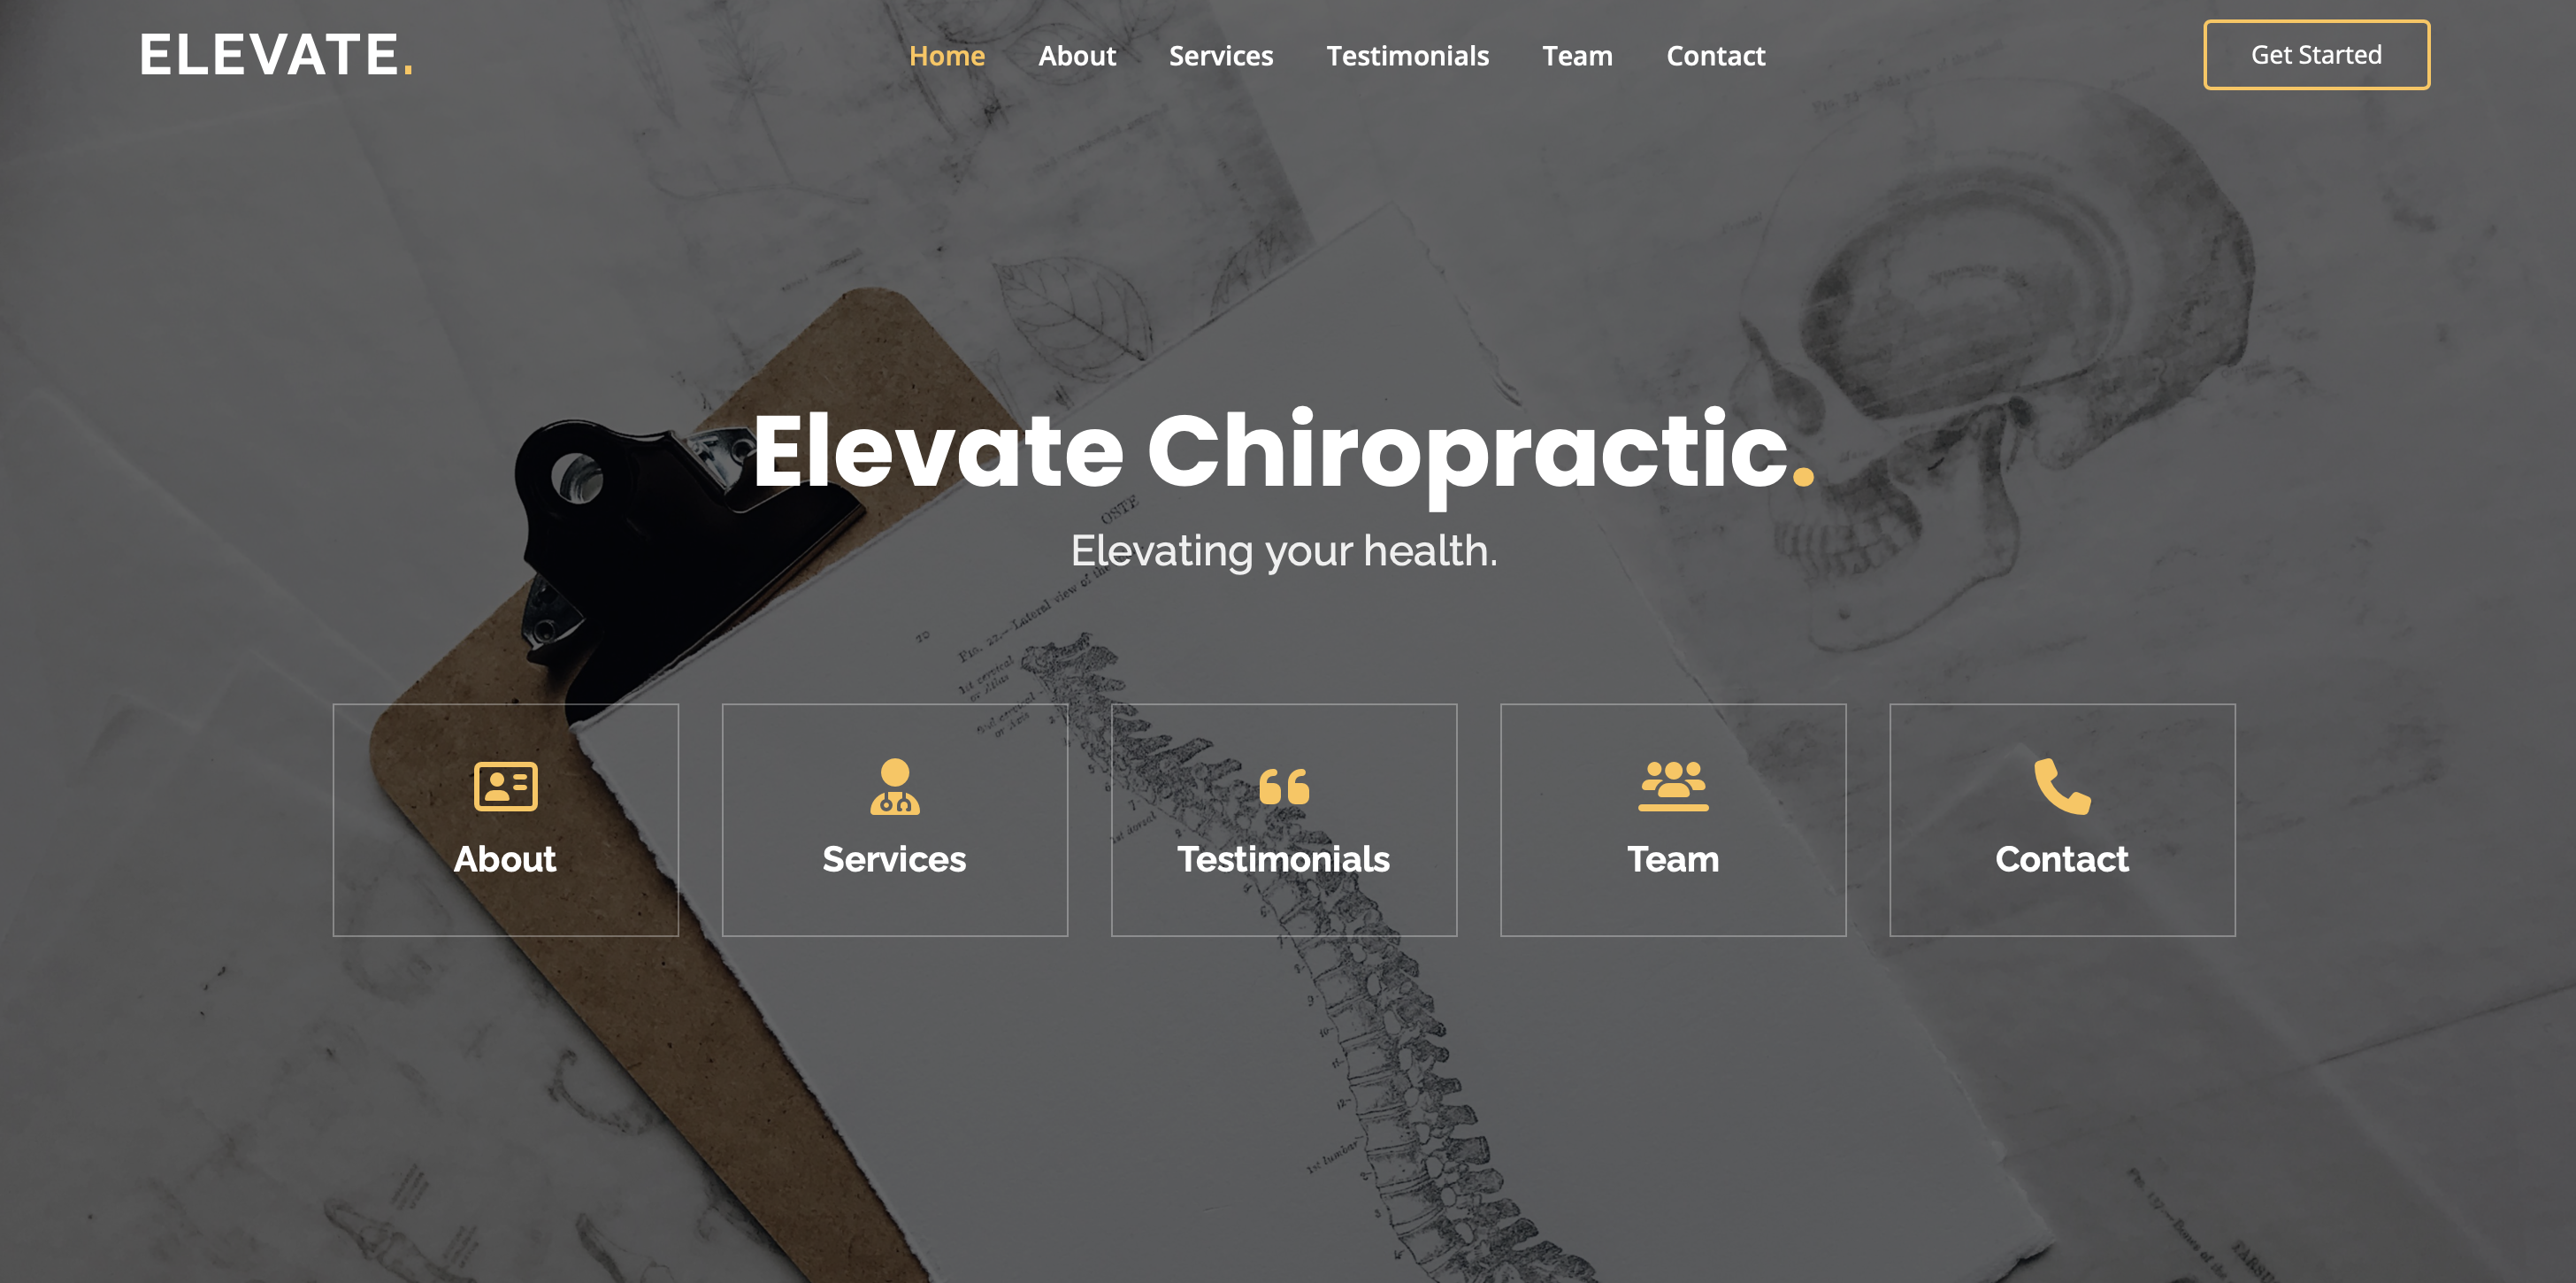 Landing page for Elevate Chiropractic